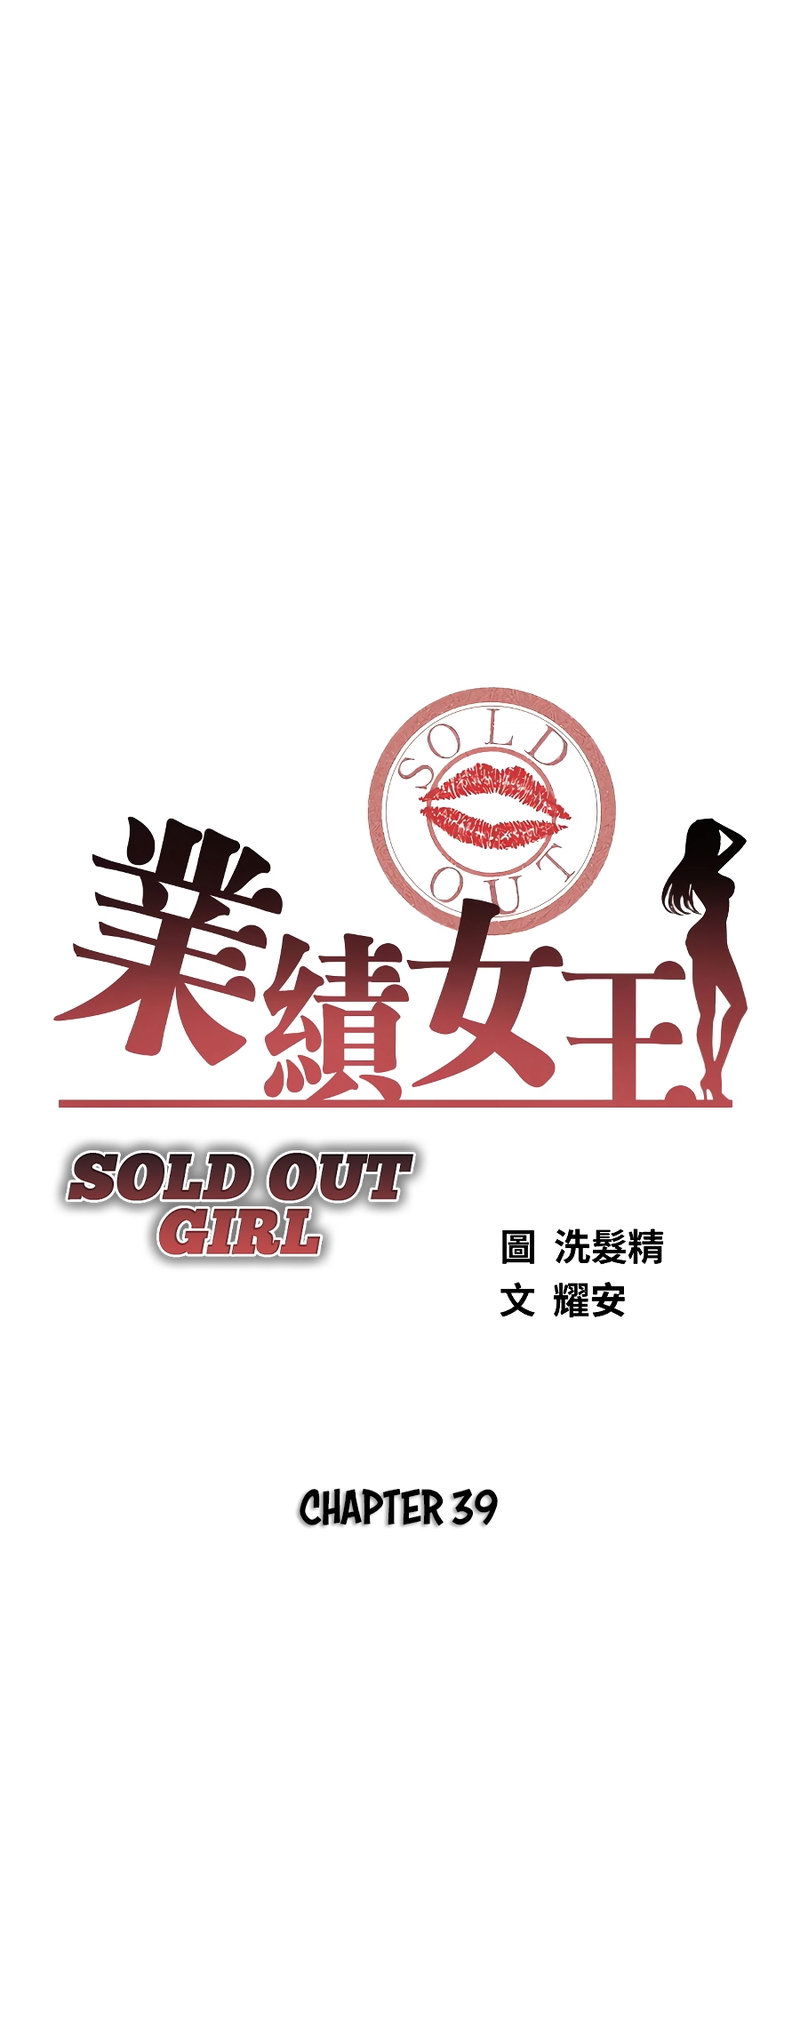 sold-out-girl-chap-39-3